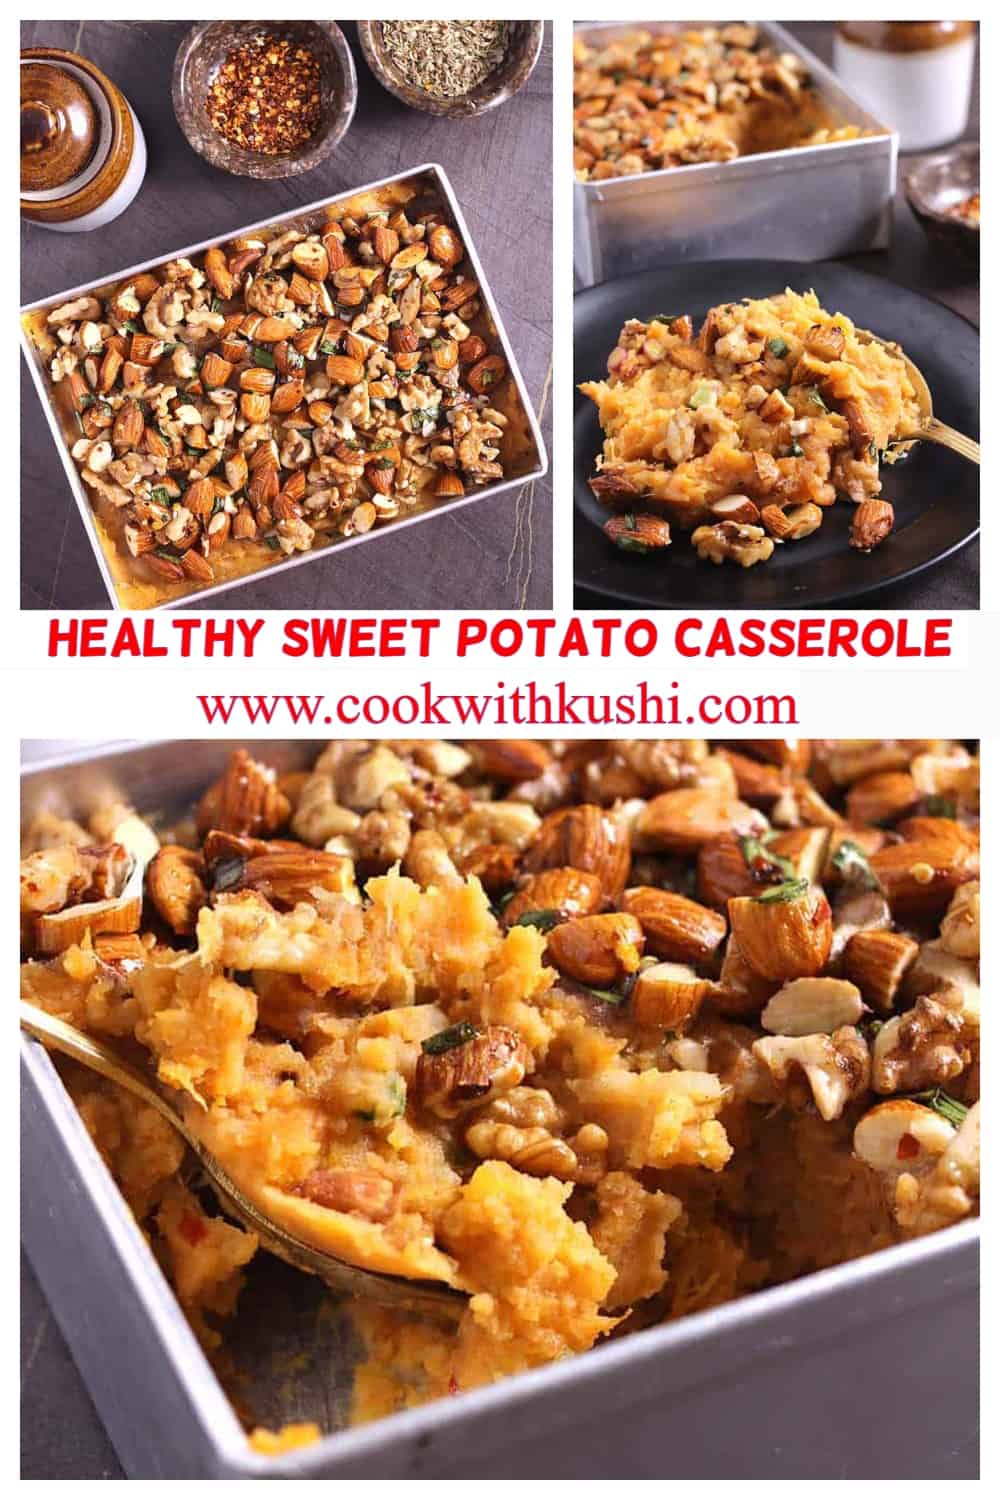 3 different images on savory, easy, healthy sweet potato casserole